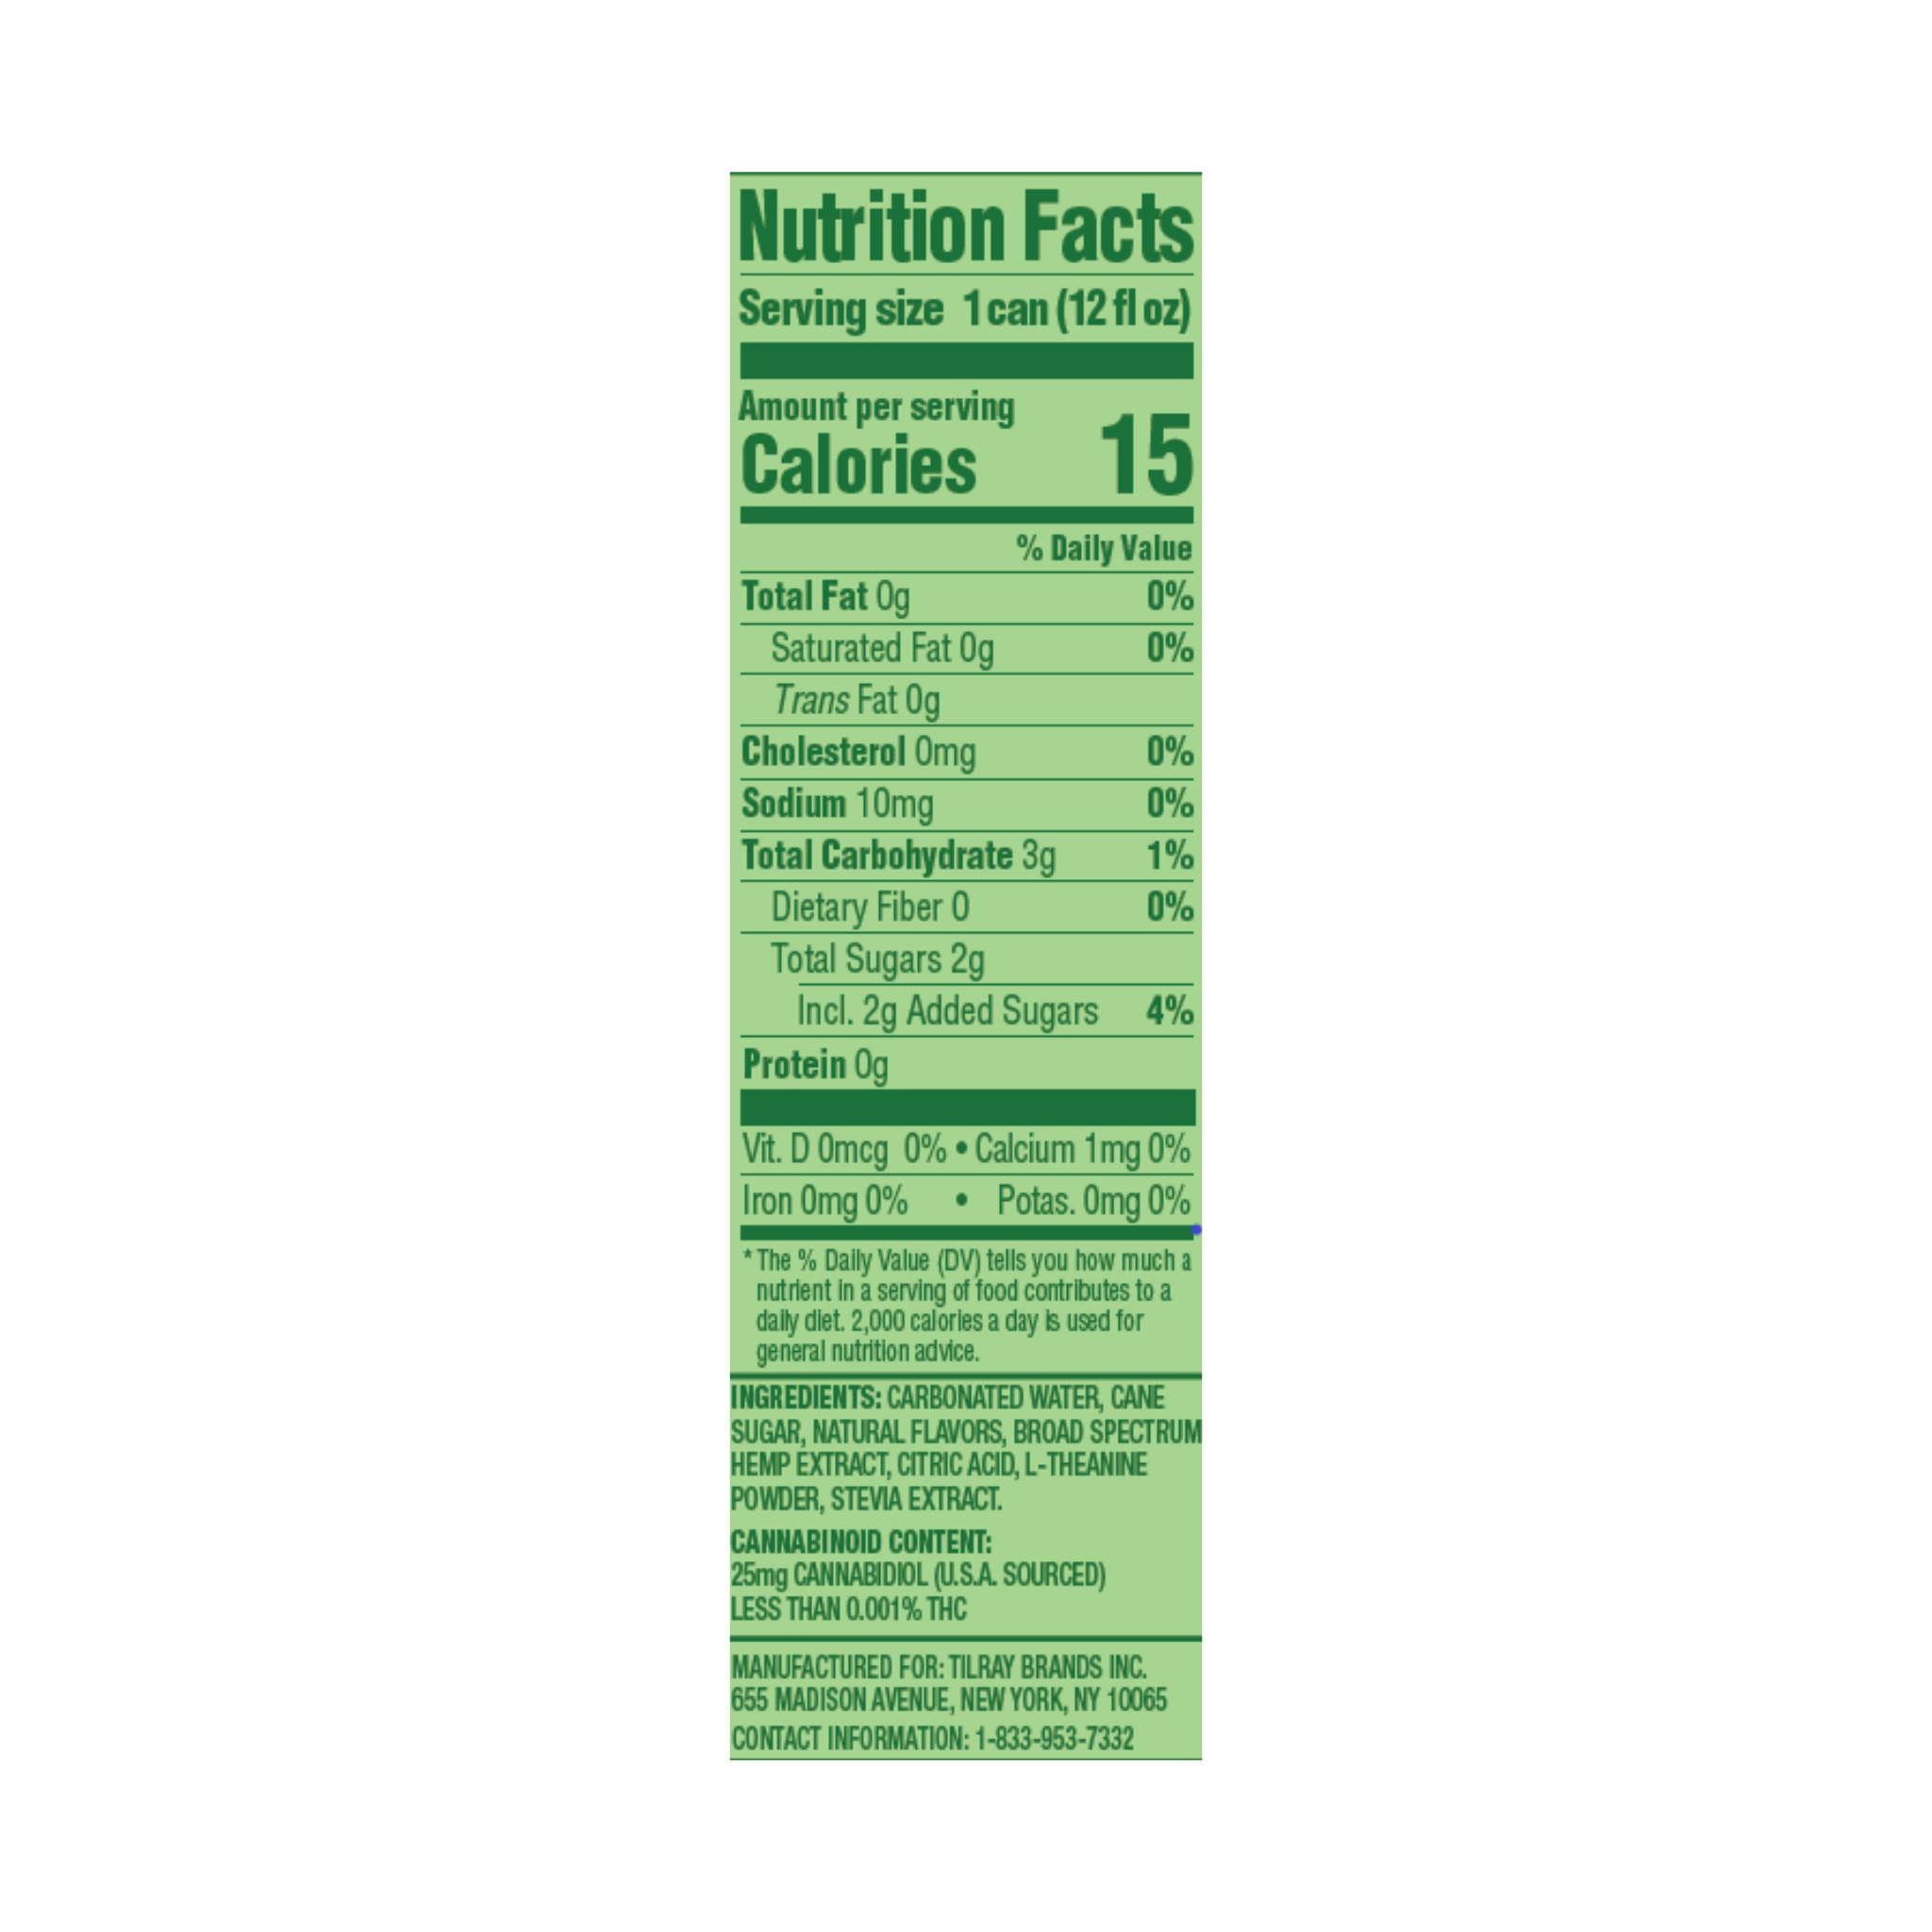 Calories: 15 / Fat: 0g / 10mg Sodium / 3g Carbs / 2g Sugar - Ingredients: Carbonated water, cane sugar, natural flavors, broad spectrum hemp extract, citric acid, l-theanine powder, stevia extract. Cannabinoid Content: 25mg 